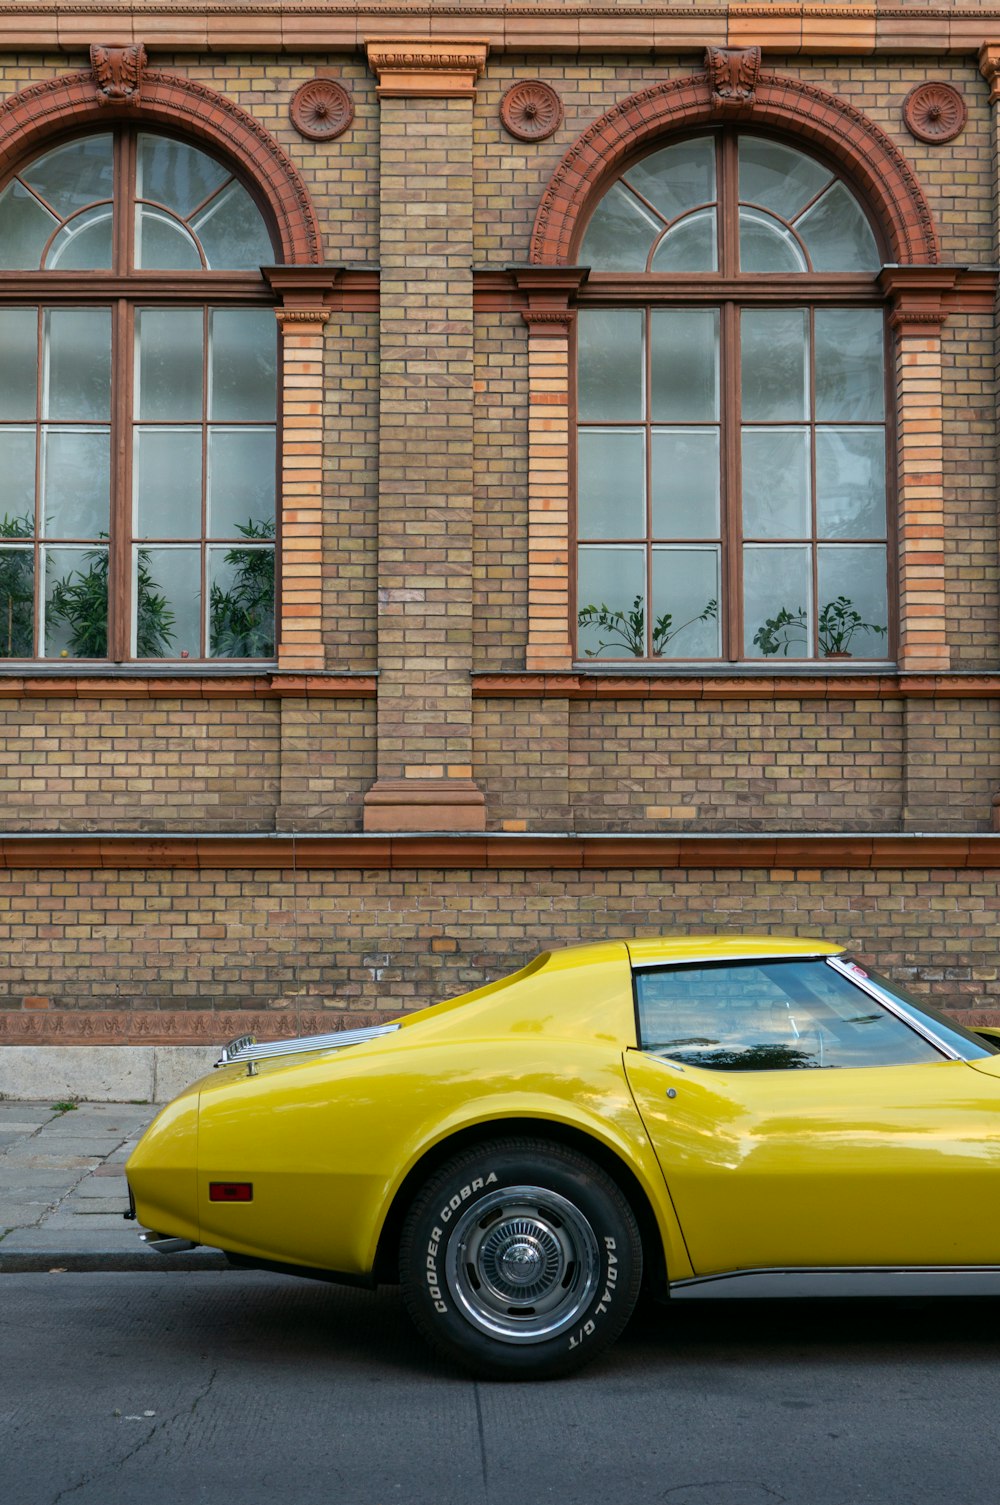 a yellow sports car parked in front of a brick building